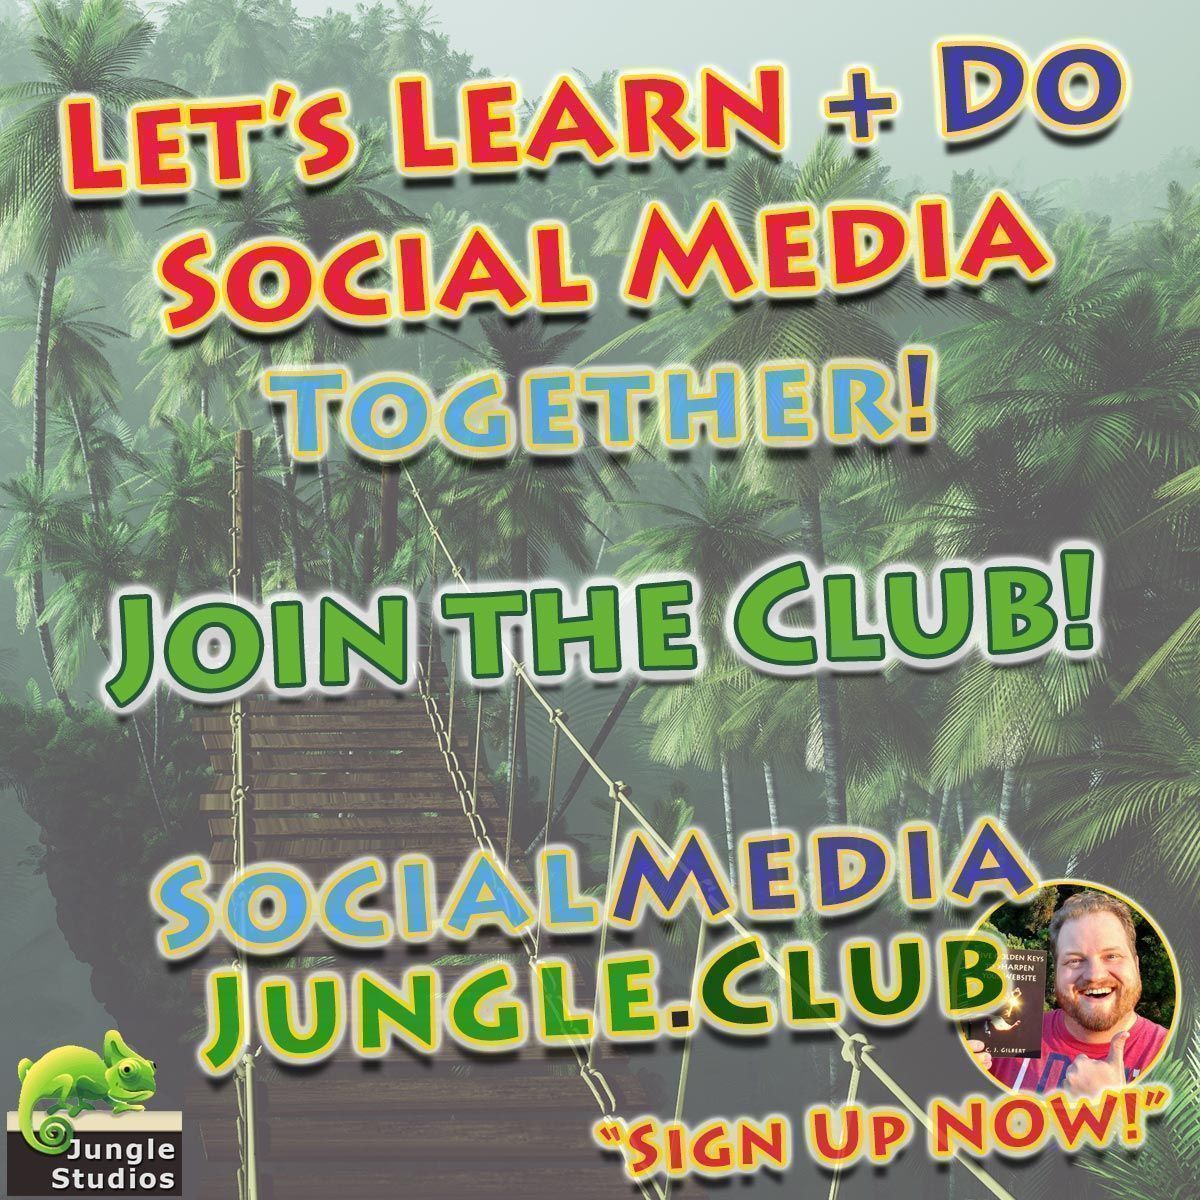 Learn Social Media with our Fun Club! 

#SocialMediaJungleClub is BOTH DIY #SocialMedia #Education & #SmallBusiness Support Group!

Learn How to 'DO' Social Media surrounded by a supportive community of #businessowners taking action together.

buff.ly/3NuJKX0

#sales